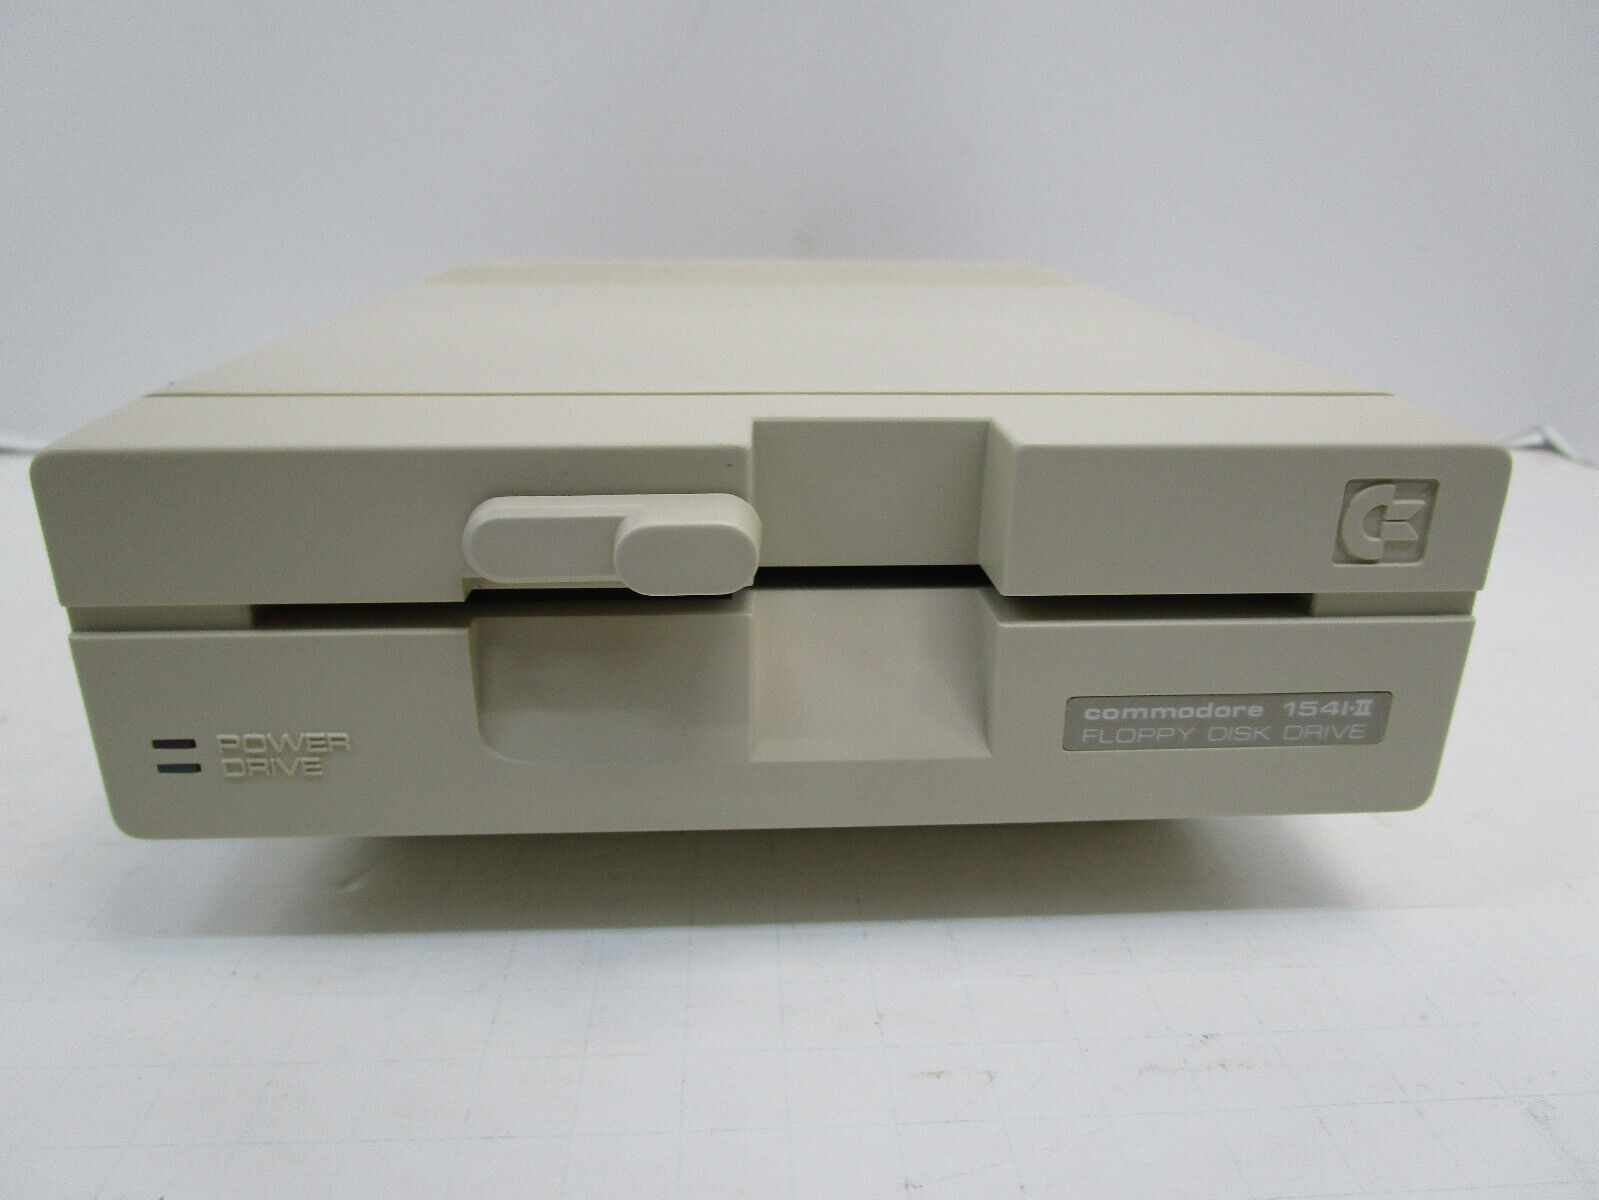 COMMODORE 1541-II FLOPPY DRIVE FOR C64 64C VIC-20 C16 PLUS/4 128 TSTED/WRKNG L95